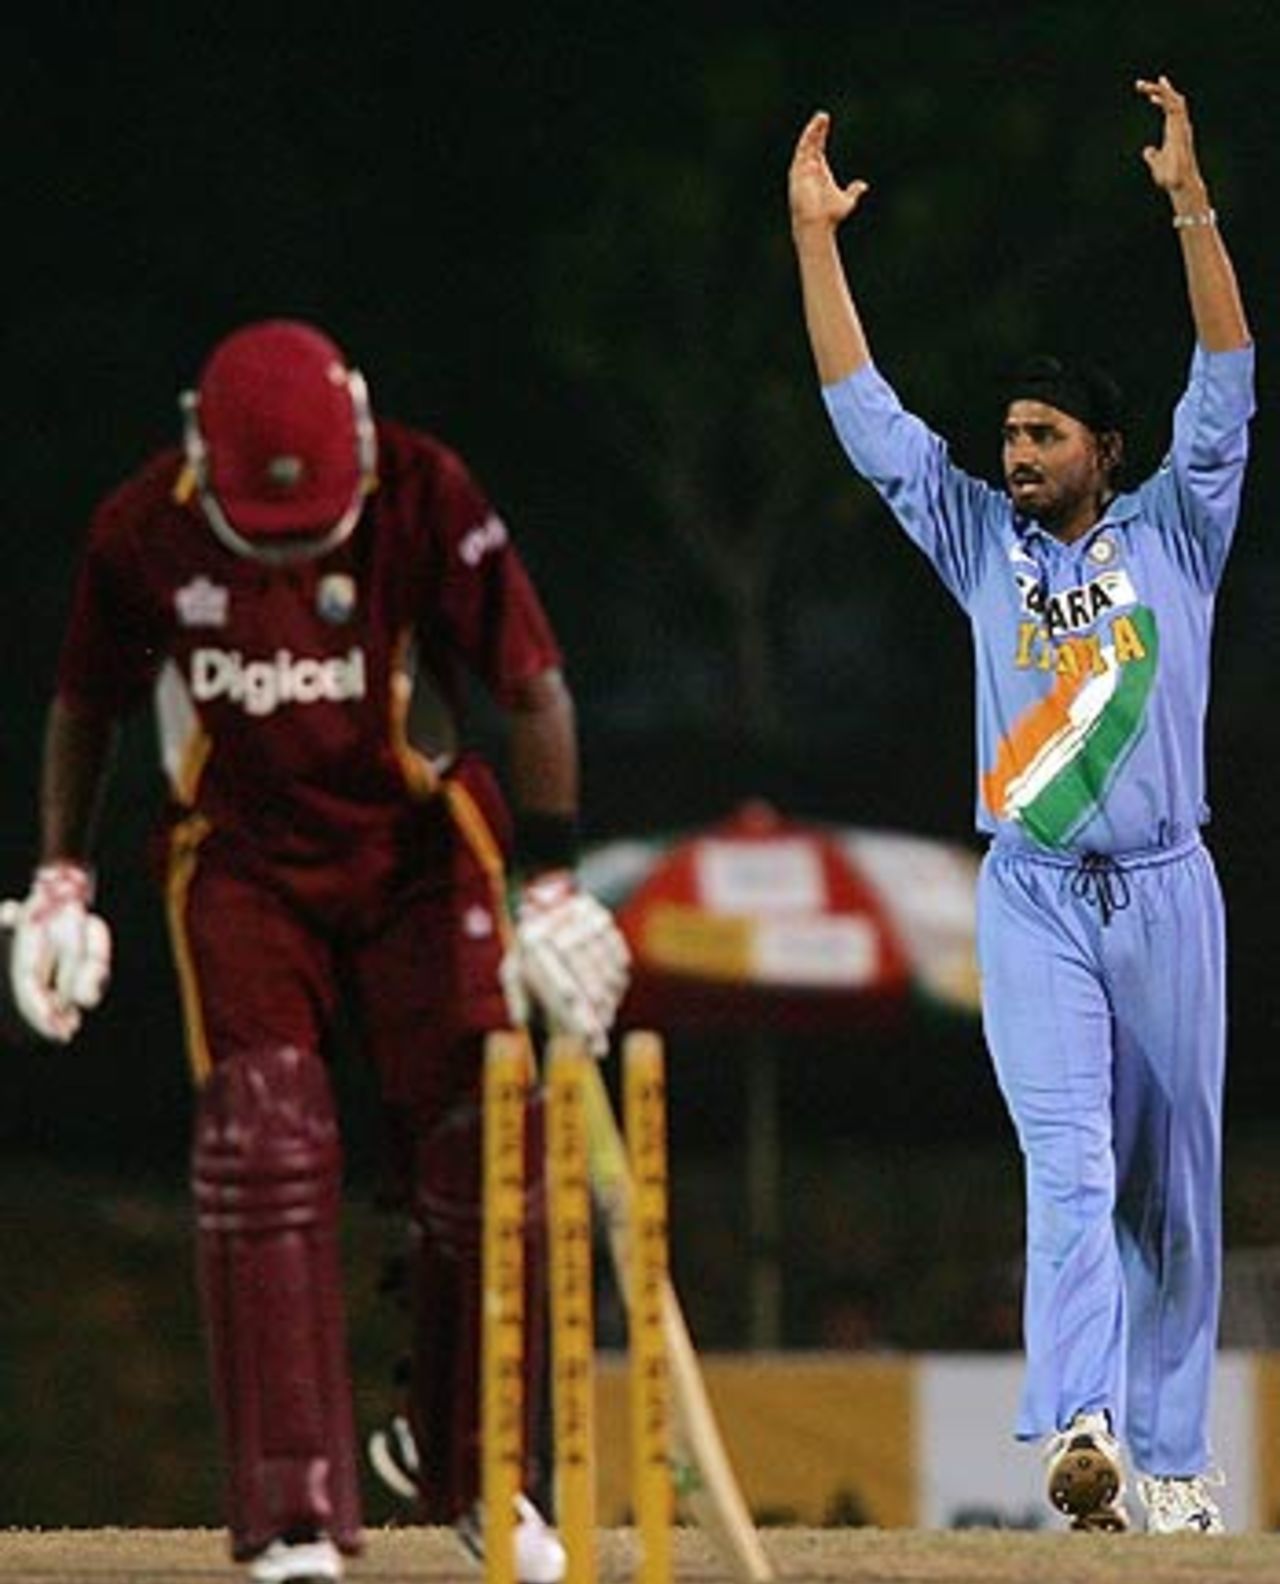 Harbhajan Singh appeals successfully for a stumping appeal against Dwayne Bravo, Kinrara Academy Oval, Kuala Lumpur, September 20, 2006